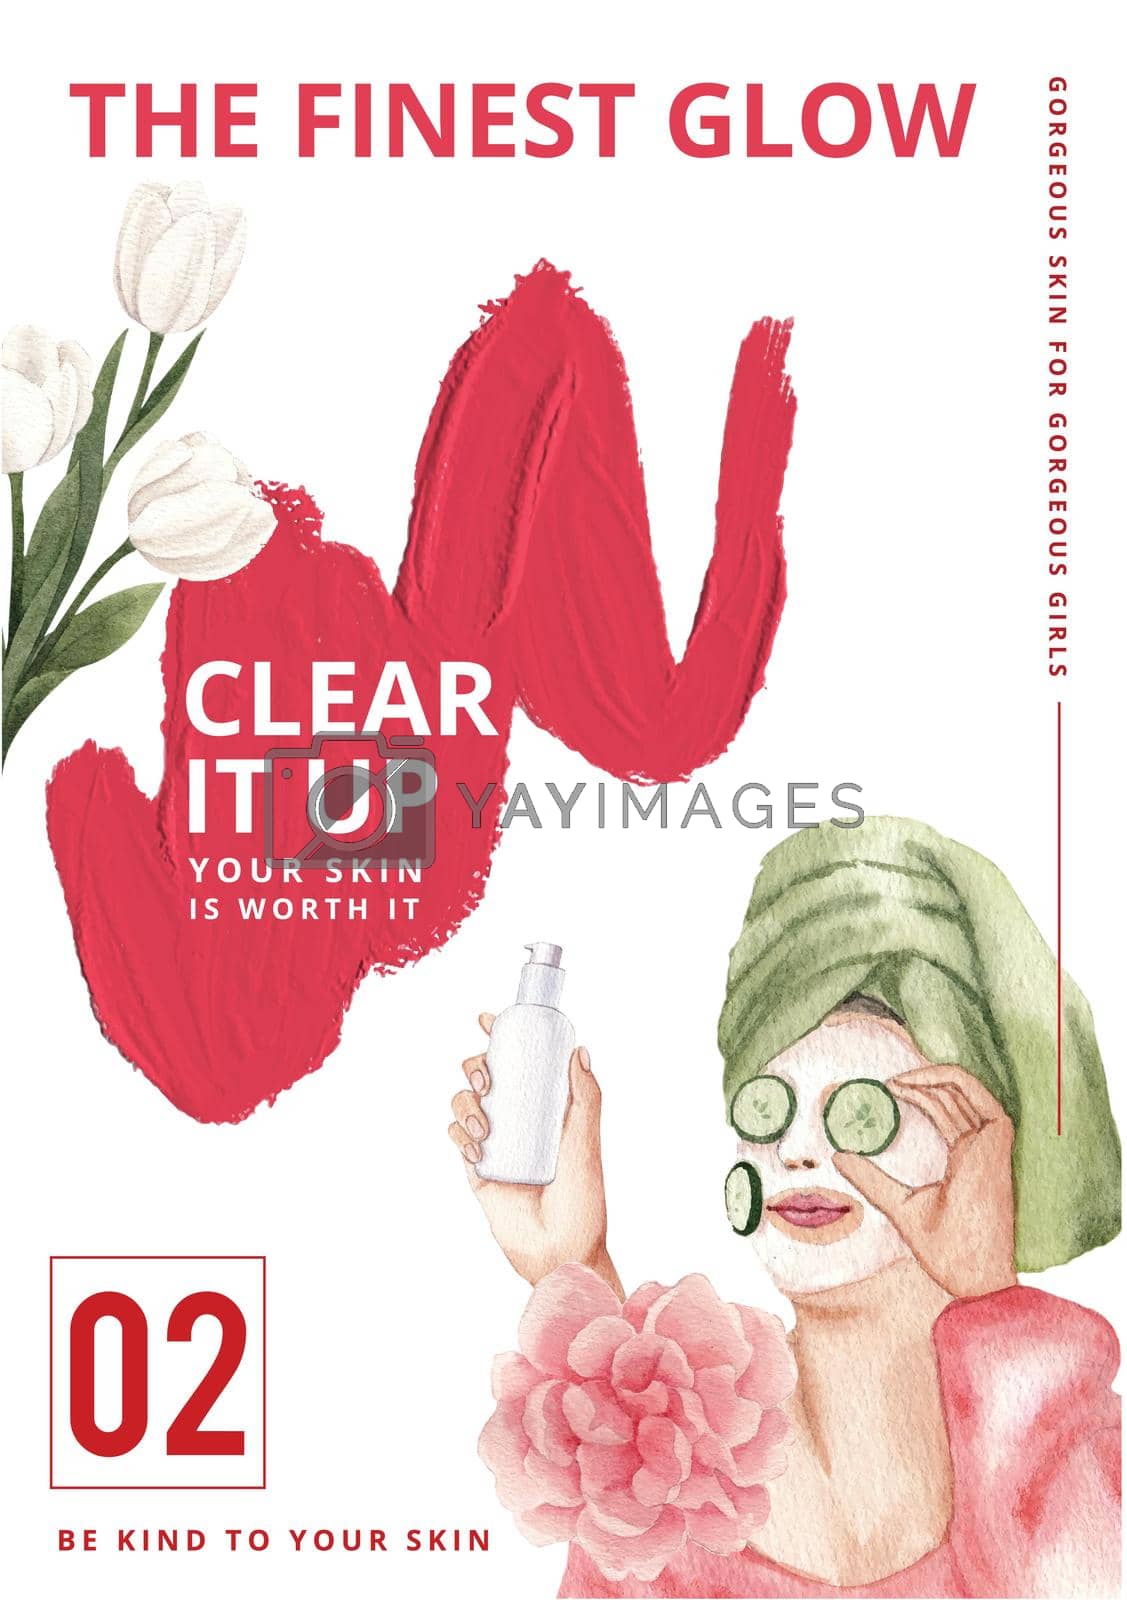 Poster template with skin care beauty concept,watercolor style
